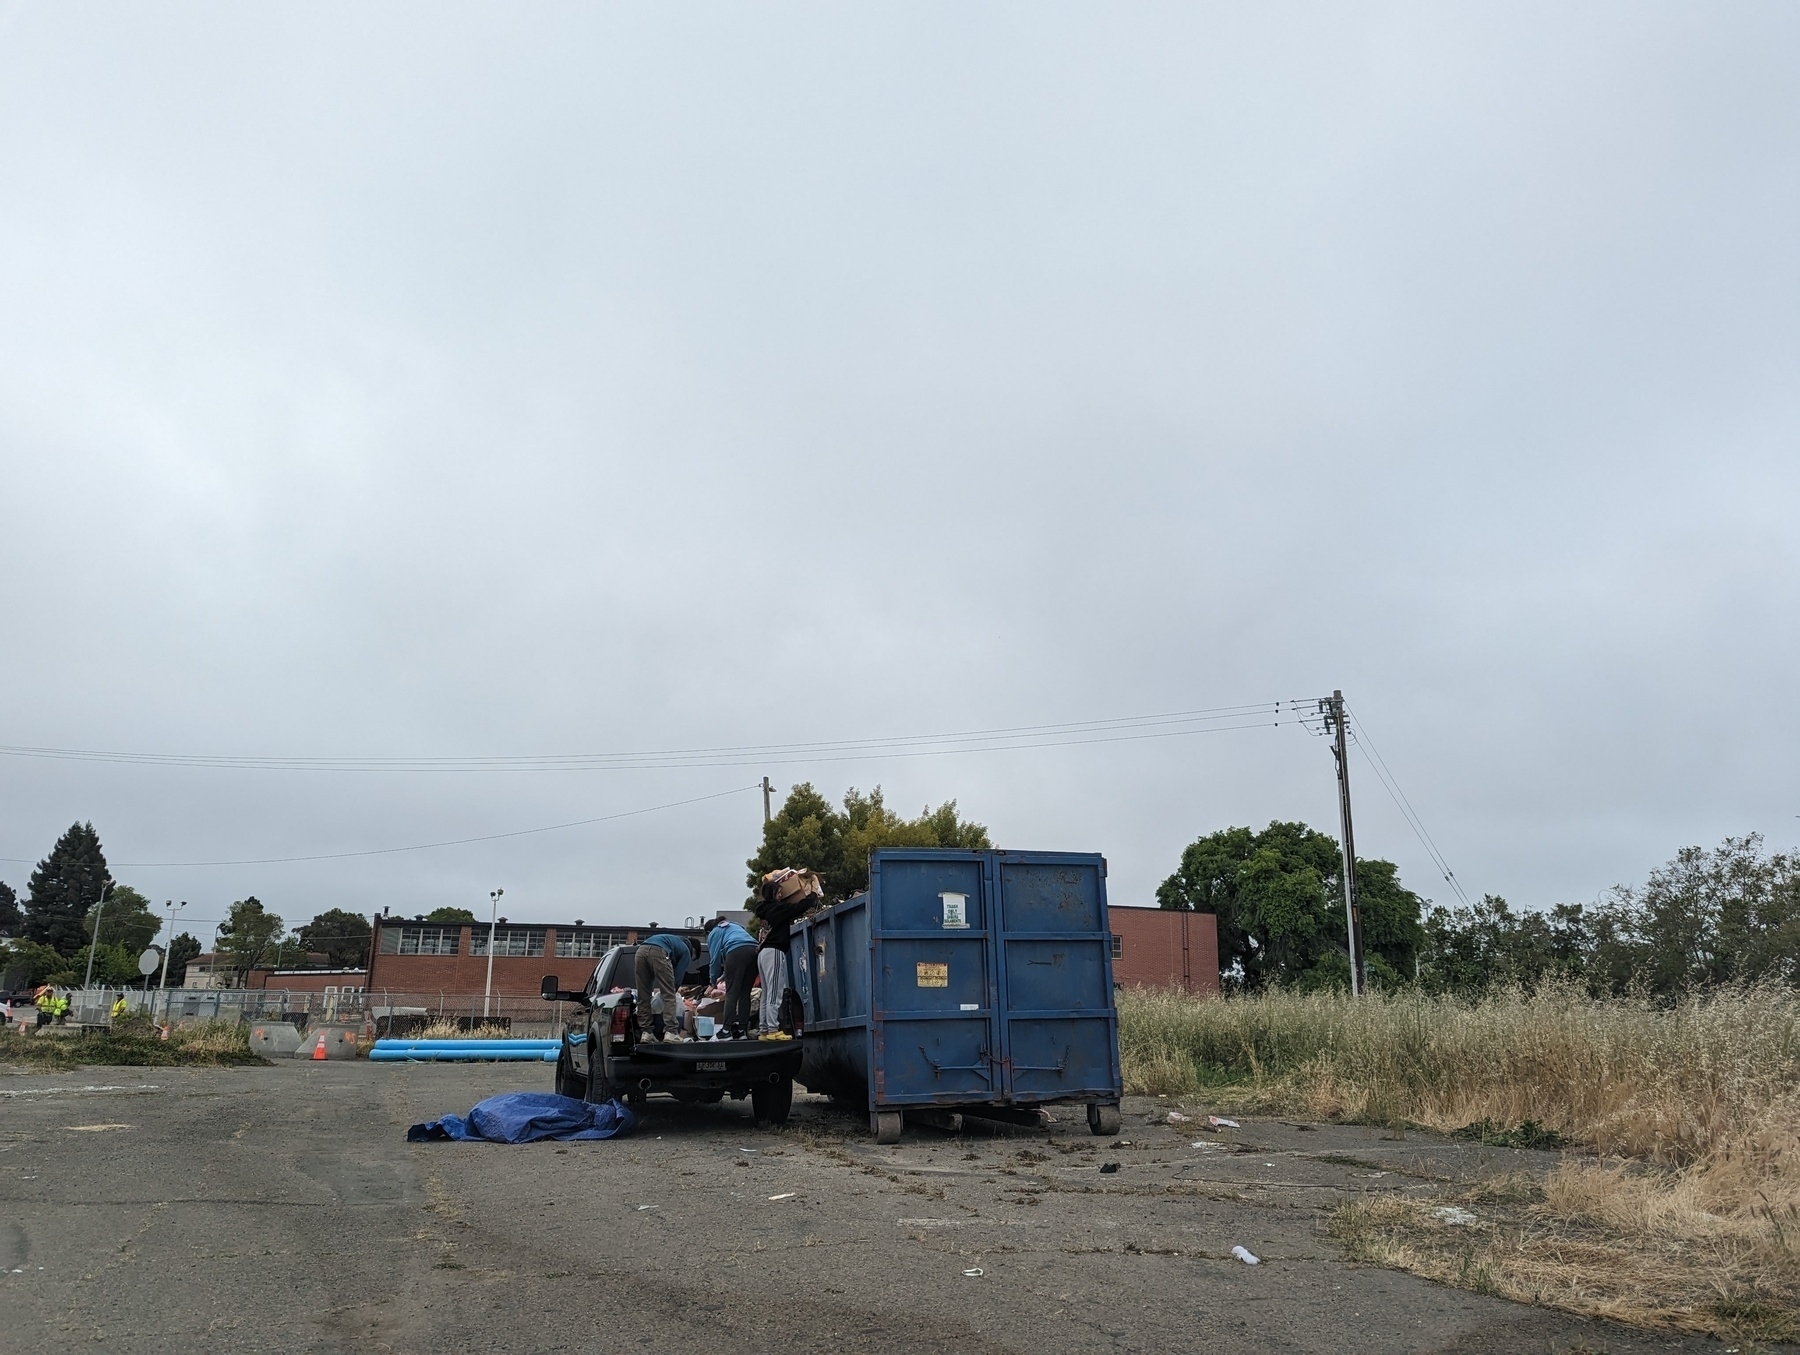 A pair of people drop off refuse and other items from the rear bed of a pickup truck into a big blue dumpster in a wide open and empty but weed choked lot under low light gray cloudy skies Saturday, May 20th, 2023 at the San Pablo public works department in the 2600 block of Moraga Road in San Pablo, California.